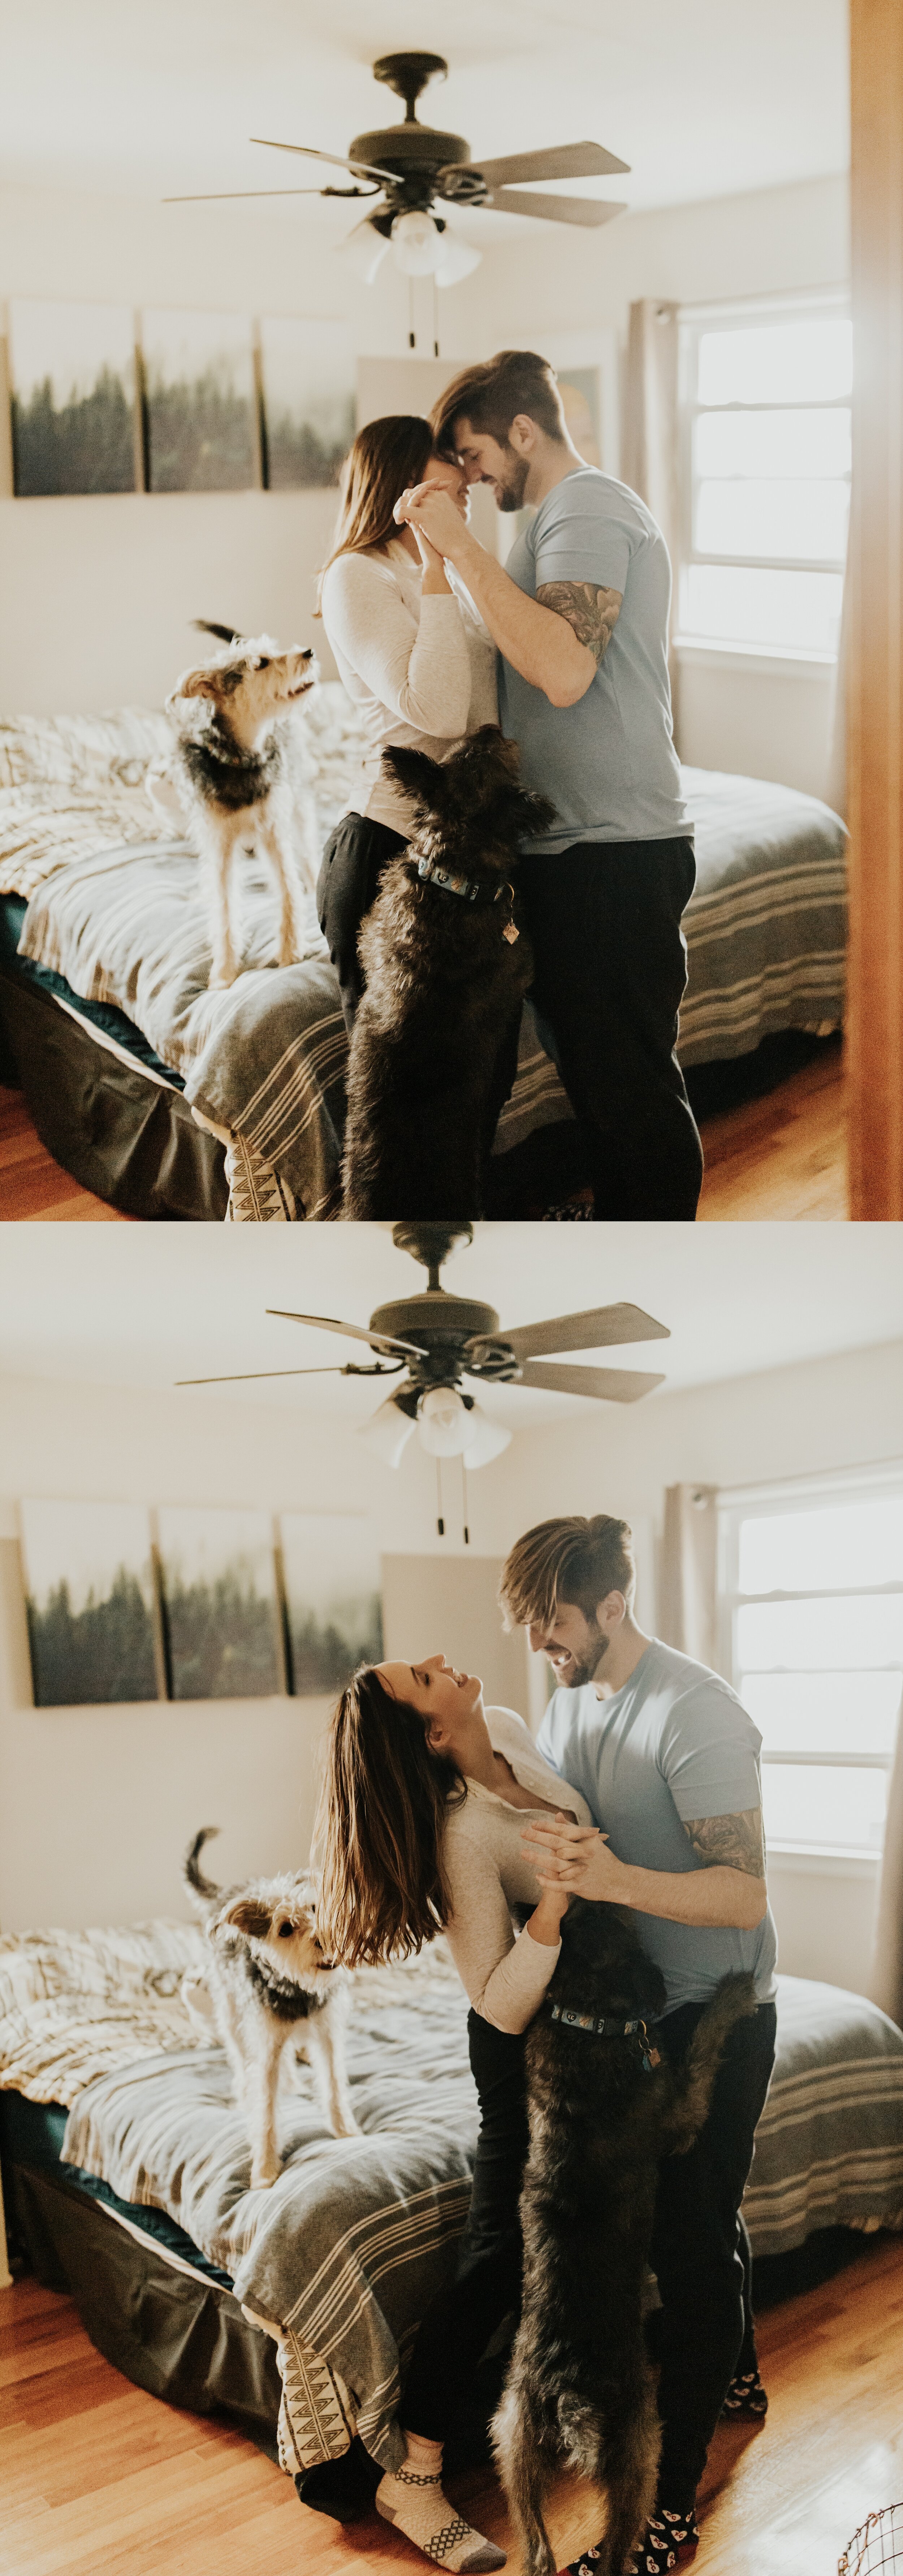 jessika-christine-photography-in+home-engagement-couples-cozy-adventurous-session (26).jpg